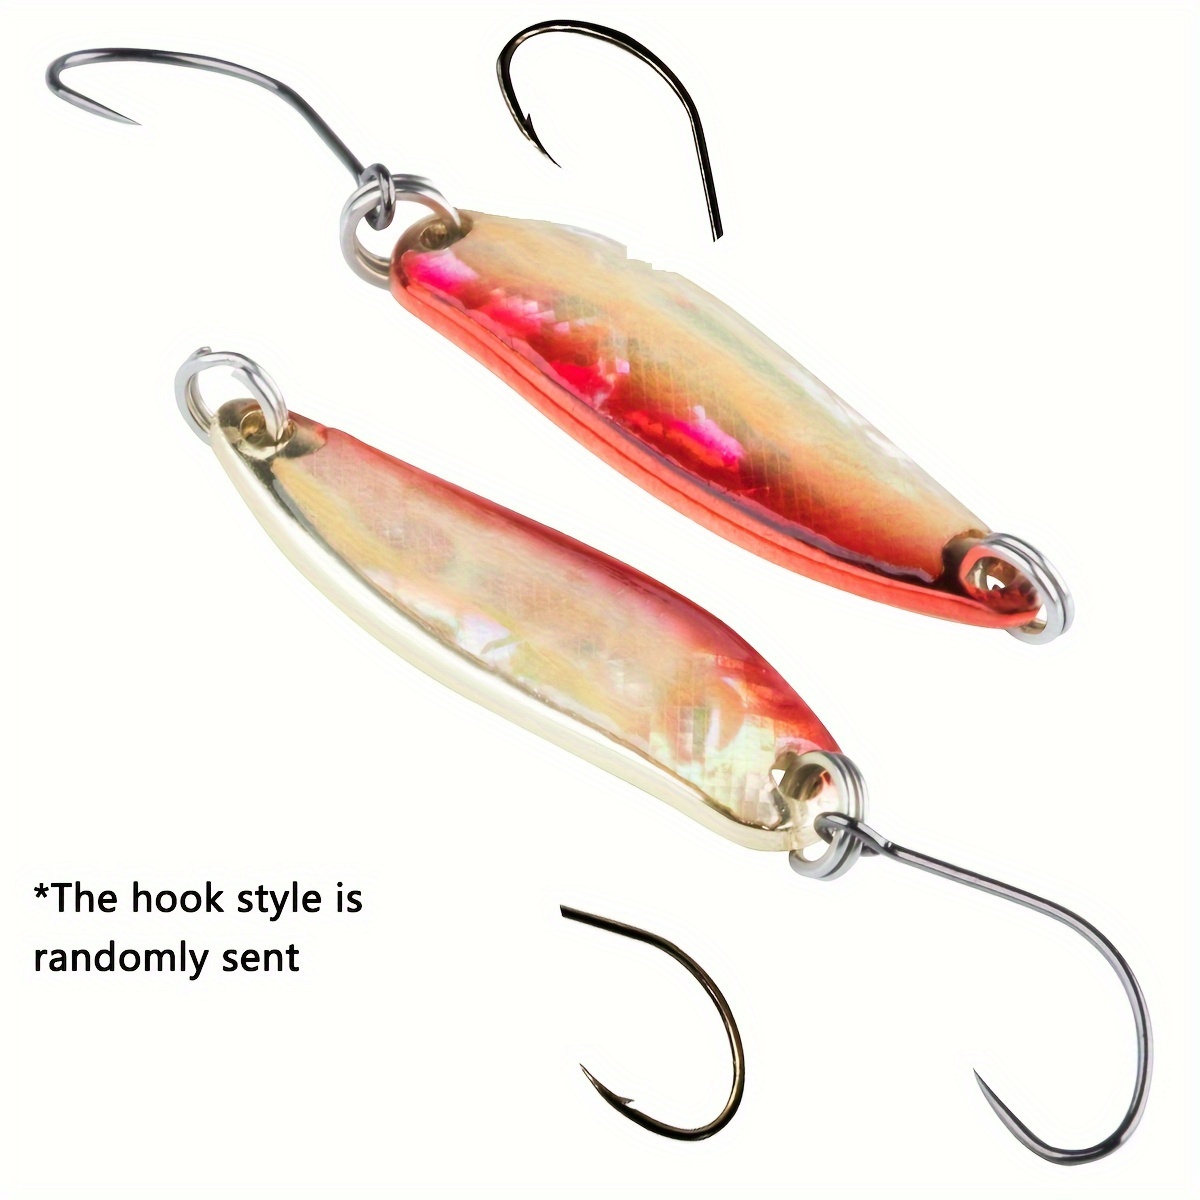 Goture Fishing Lures Fishing Spoons,Hard Lures Saltwater Spoon Lures  Casting Spoon/Ice Fishing Jigs for Trout Bass Pike Walleye Crappie Bluegill